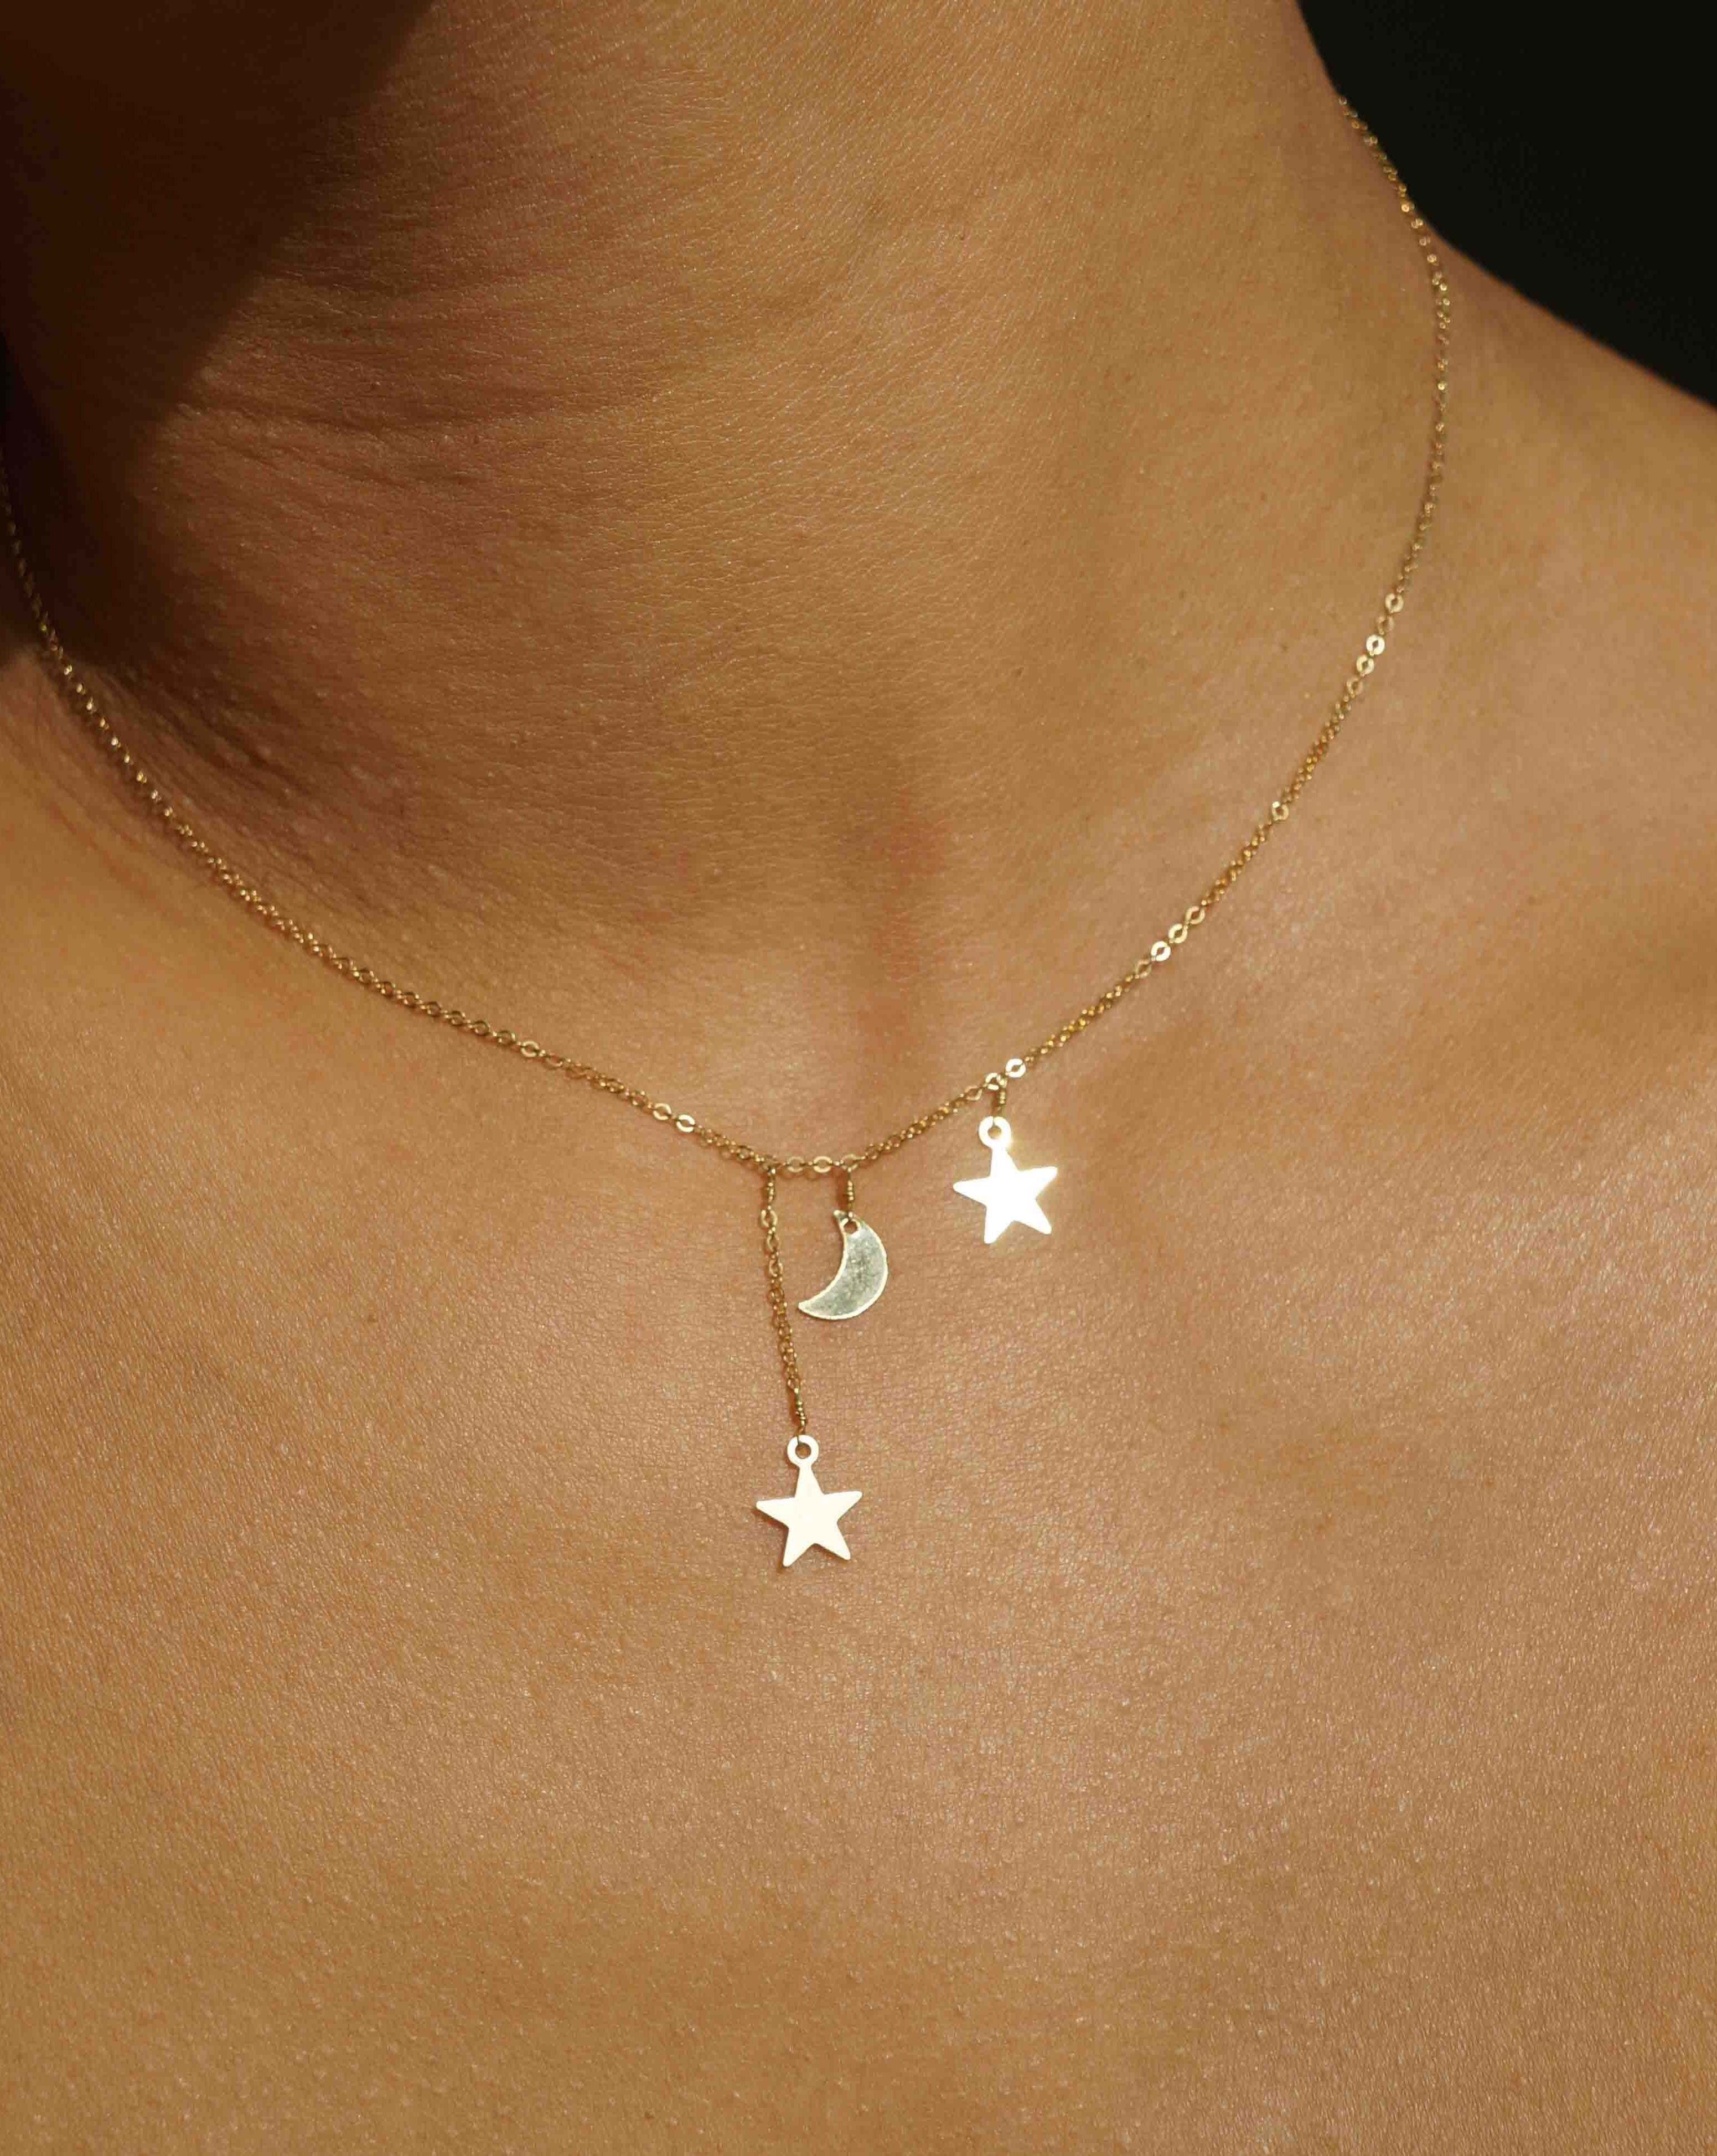 Filante Necklace by KOZAKH. A 16 to 18 inch adjustable length necklace in 14K Gold Filled, featuring moon and star charms with 1 star charm drop of about 0.5 inch. 